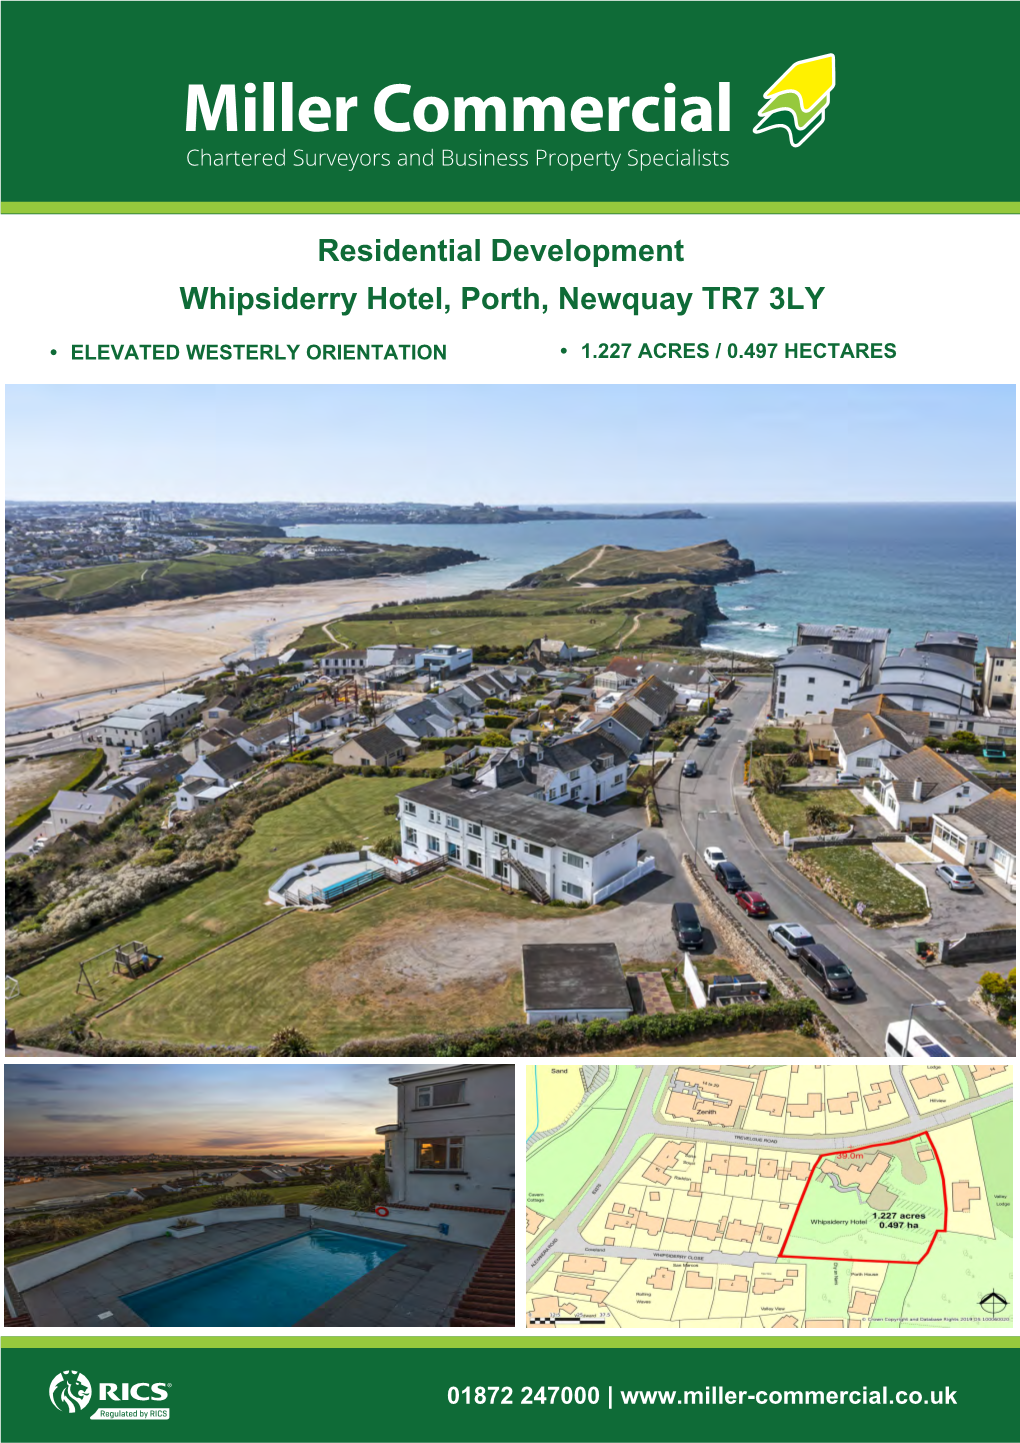 Whipsiderry Hotel, Porth, Newquay TR7 3LY Residential Development